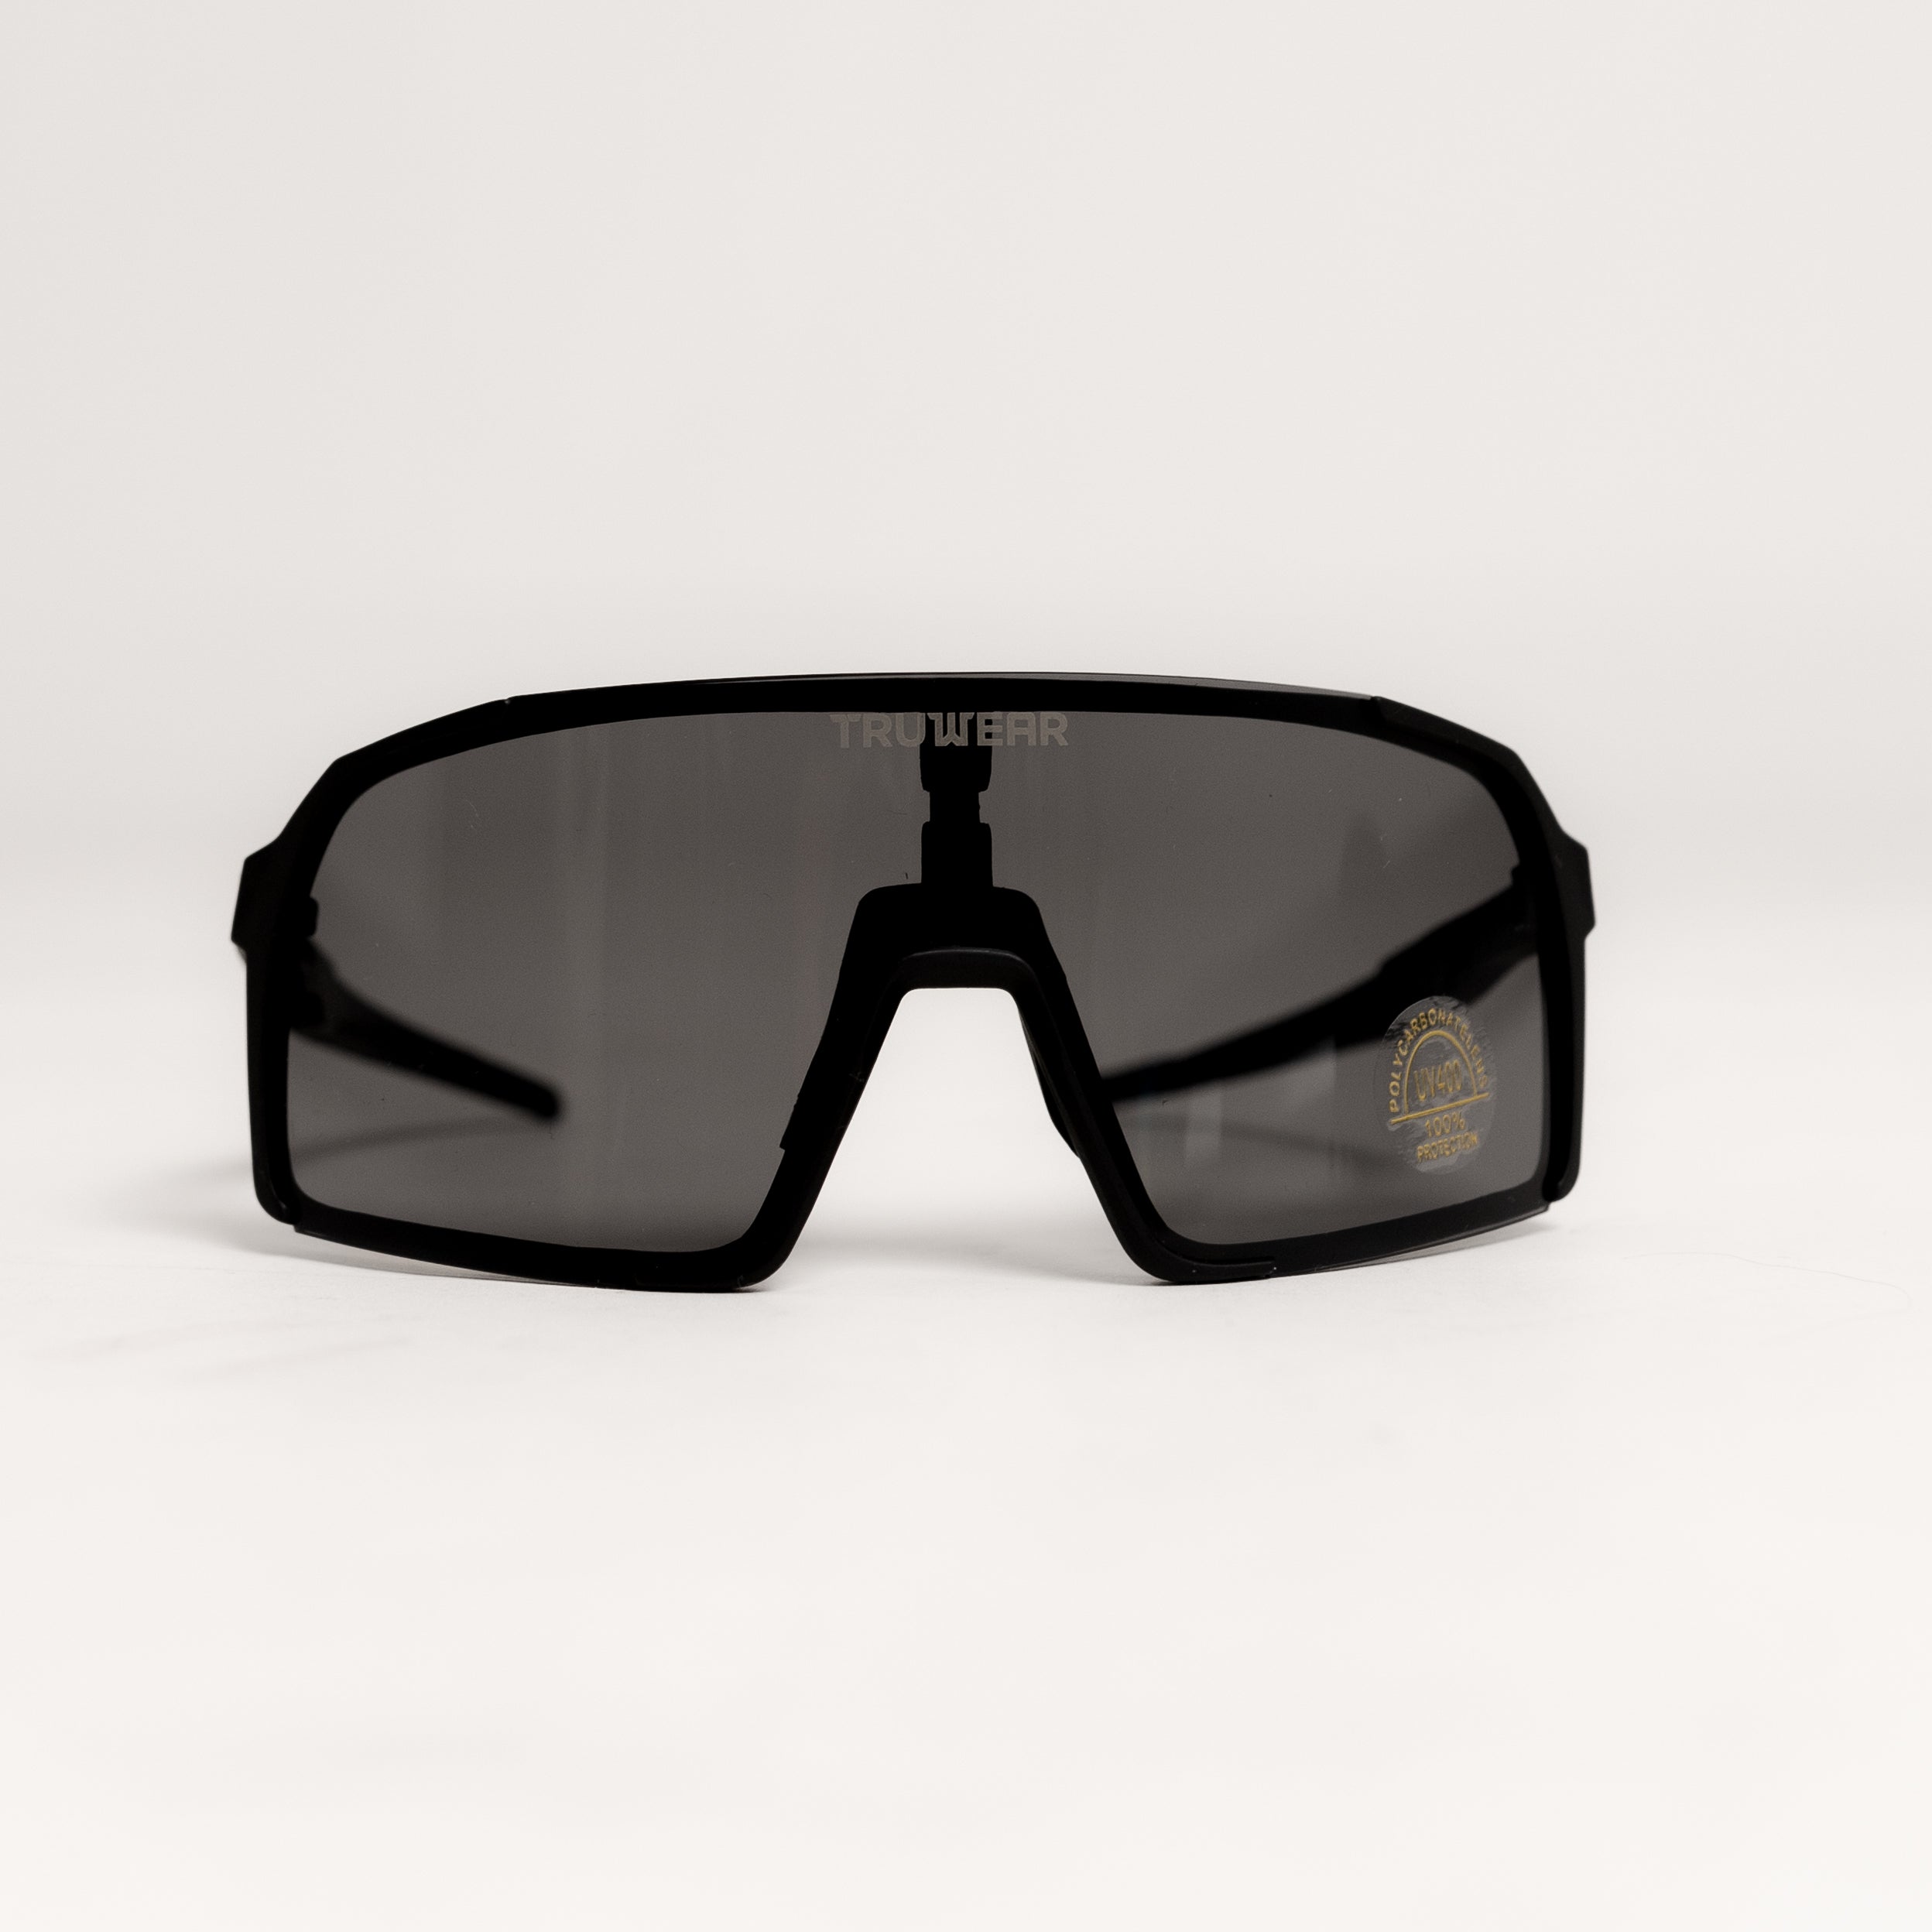 Limited Edition Sunglasses + extra Lens